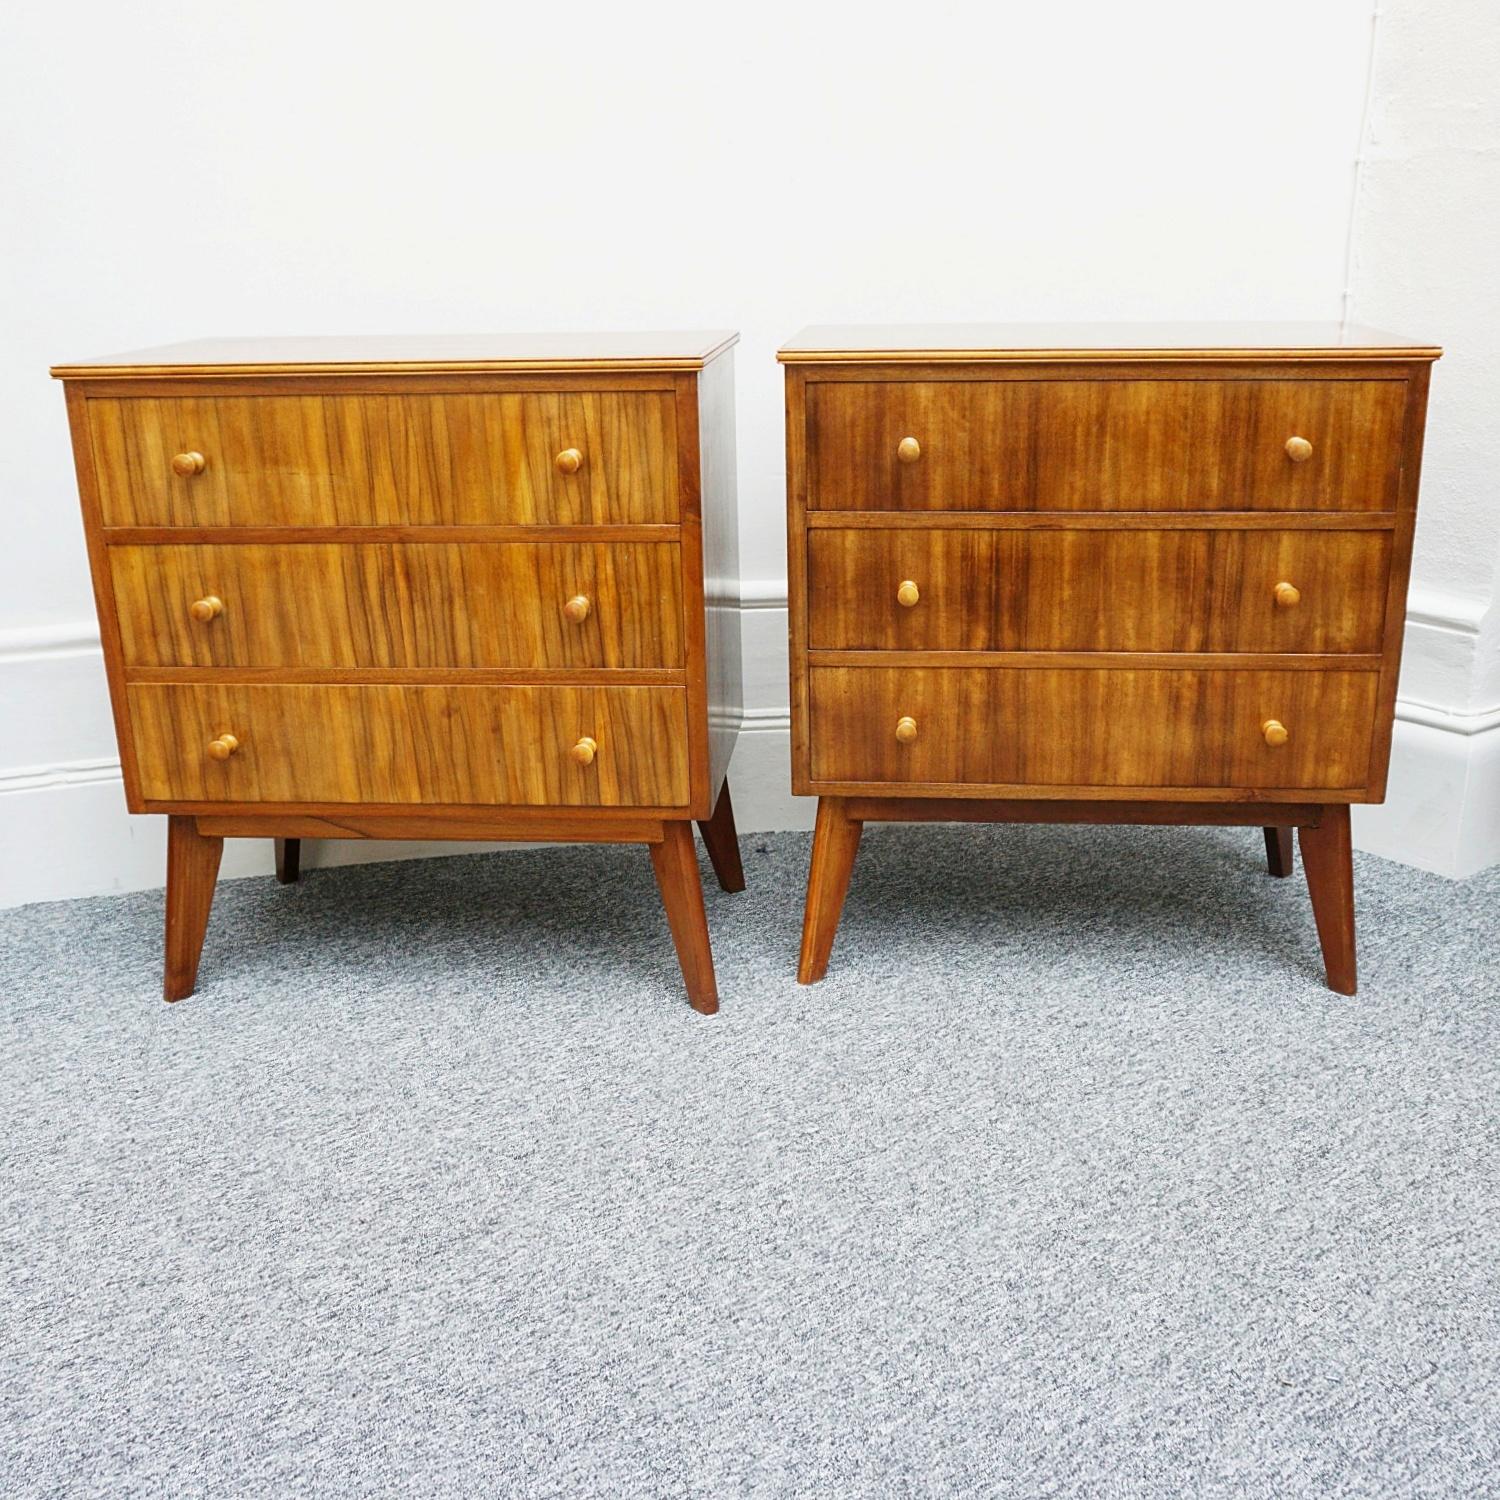 Mid-20th Century Pair of Mid-Century Modern Chests of Drawers circa 1950